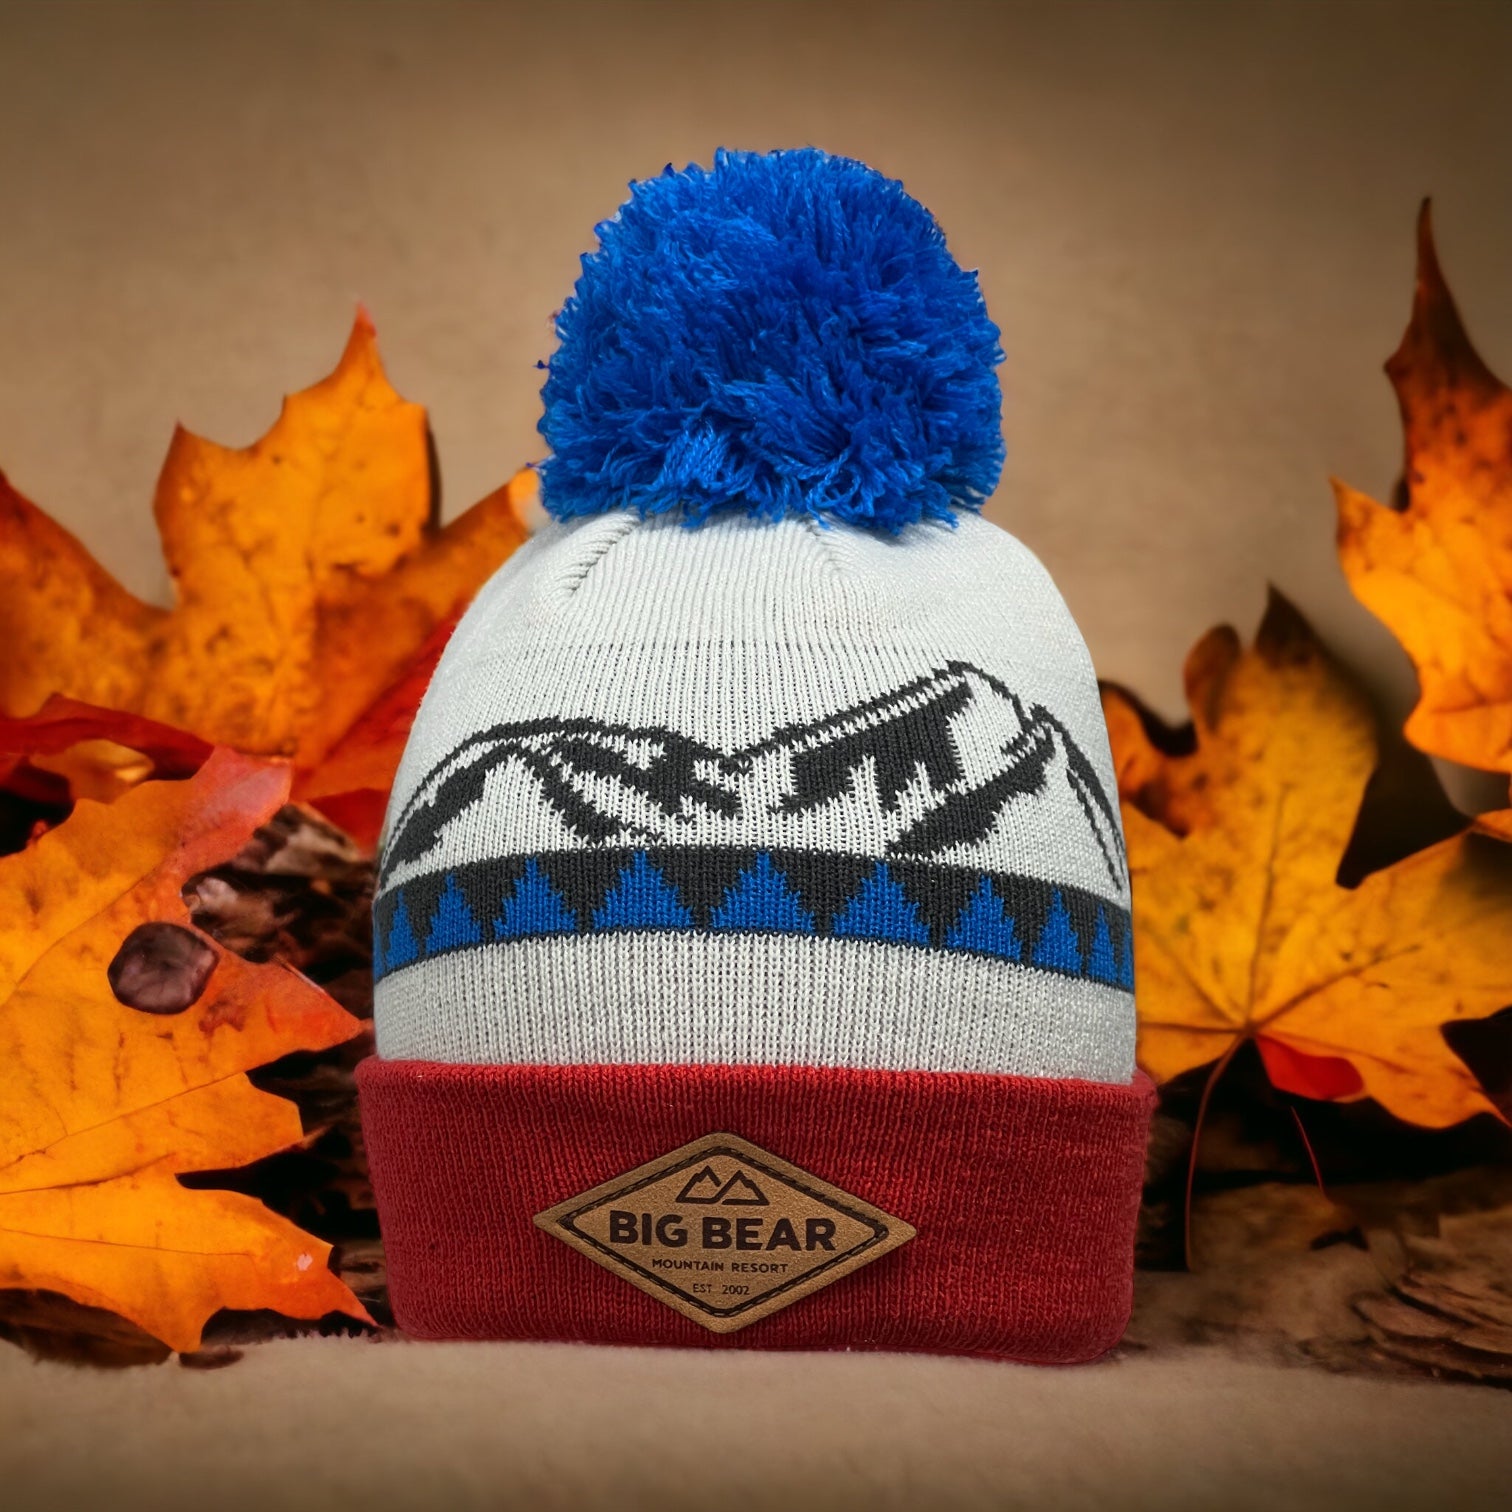 Leather BBMR Patch, Fold of Beanie Red, Mixed with Blue & Grey pattern throughout w/ mountains